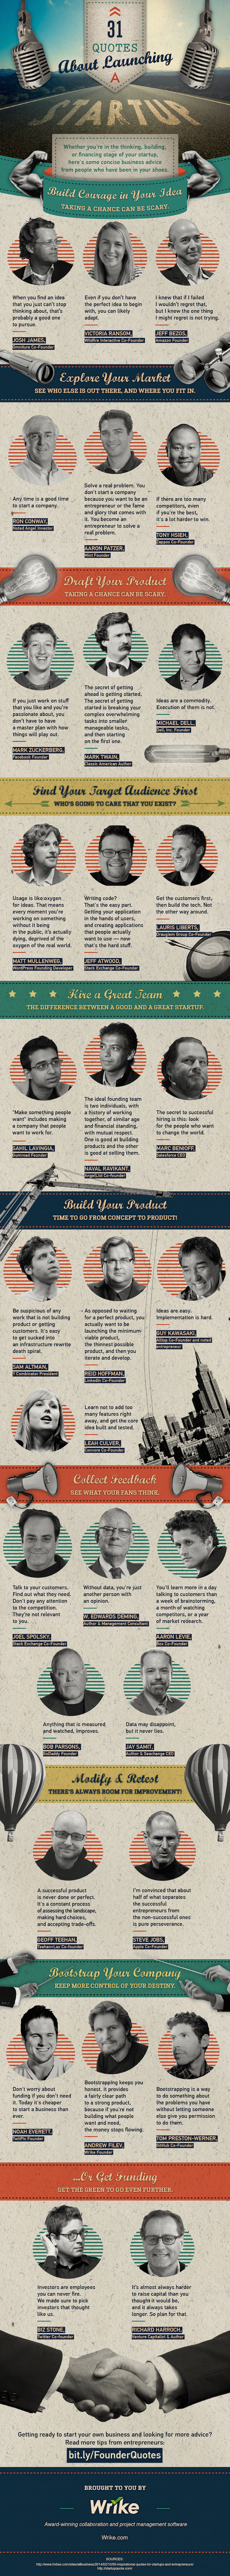 31 Quotes About Launching a Startup (#Infographic)